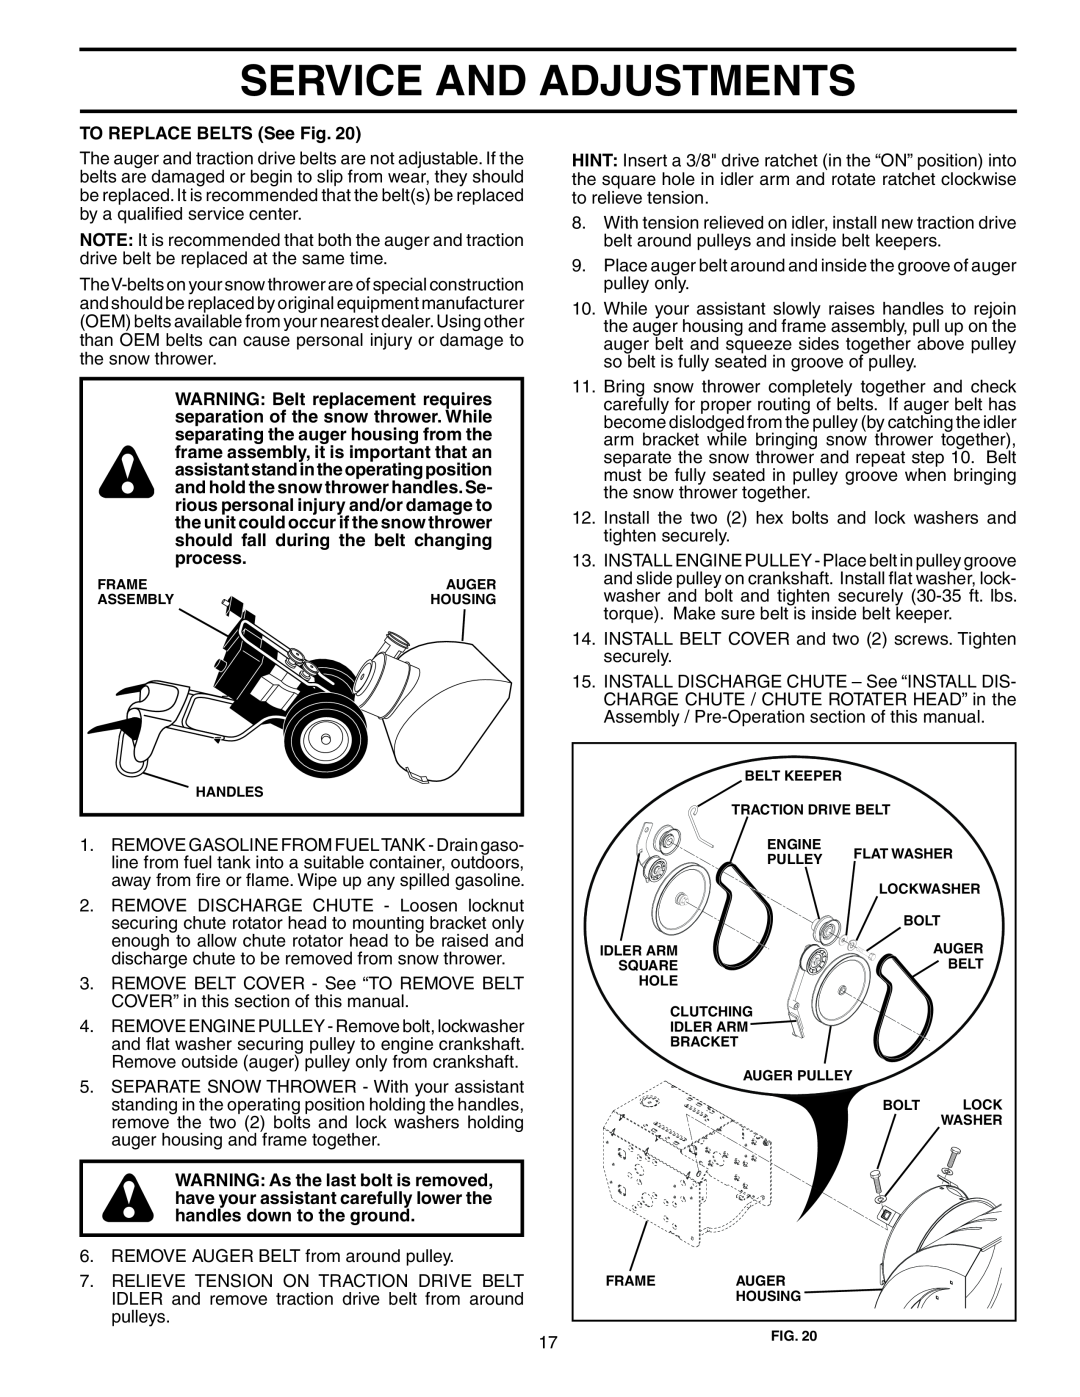 Husqvarna 1027STE owner manual Service And Adjustments, TO REPLACE BELTS See Fig 